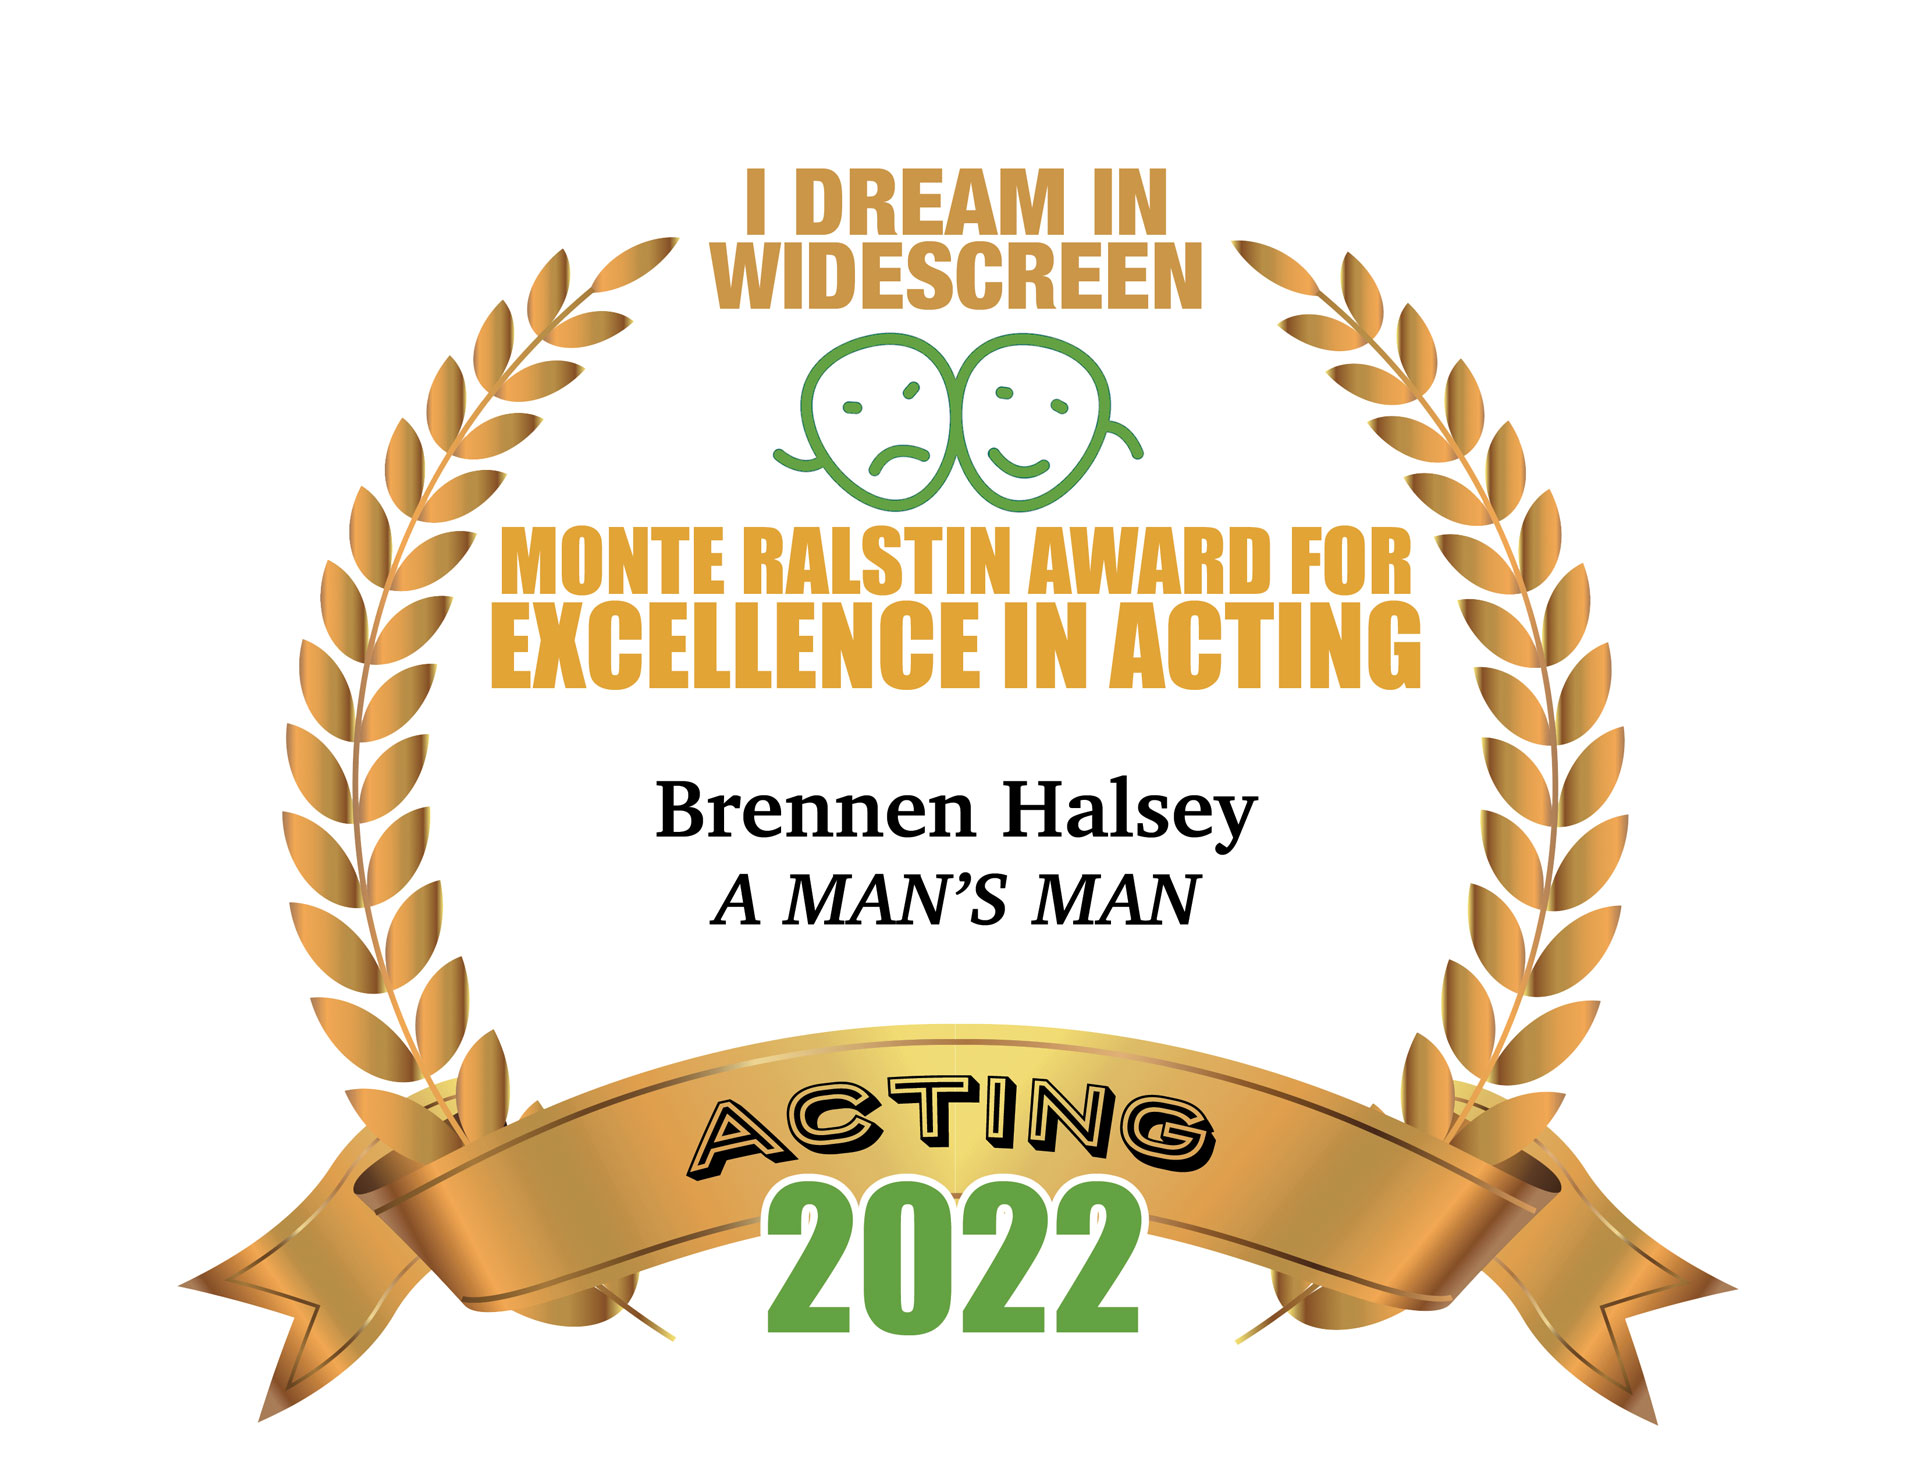 Monte Ralstin Award for Excellence in Acting